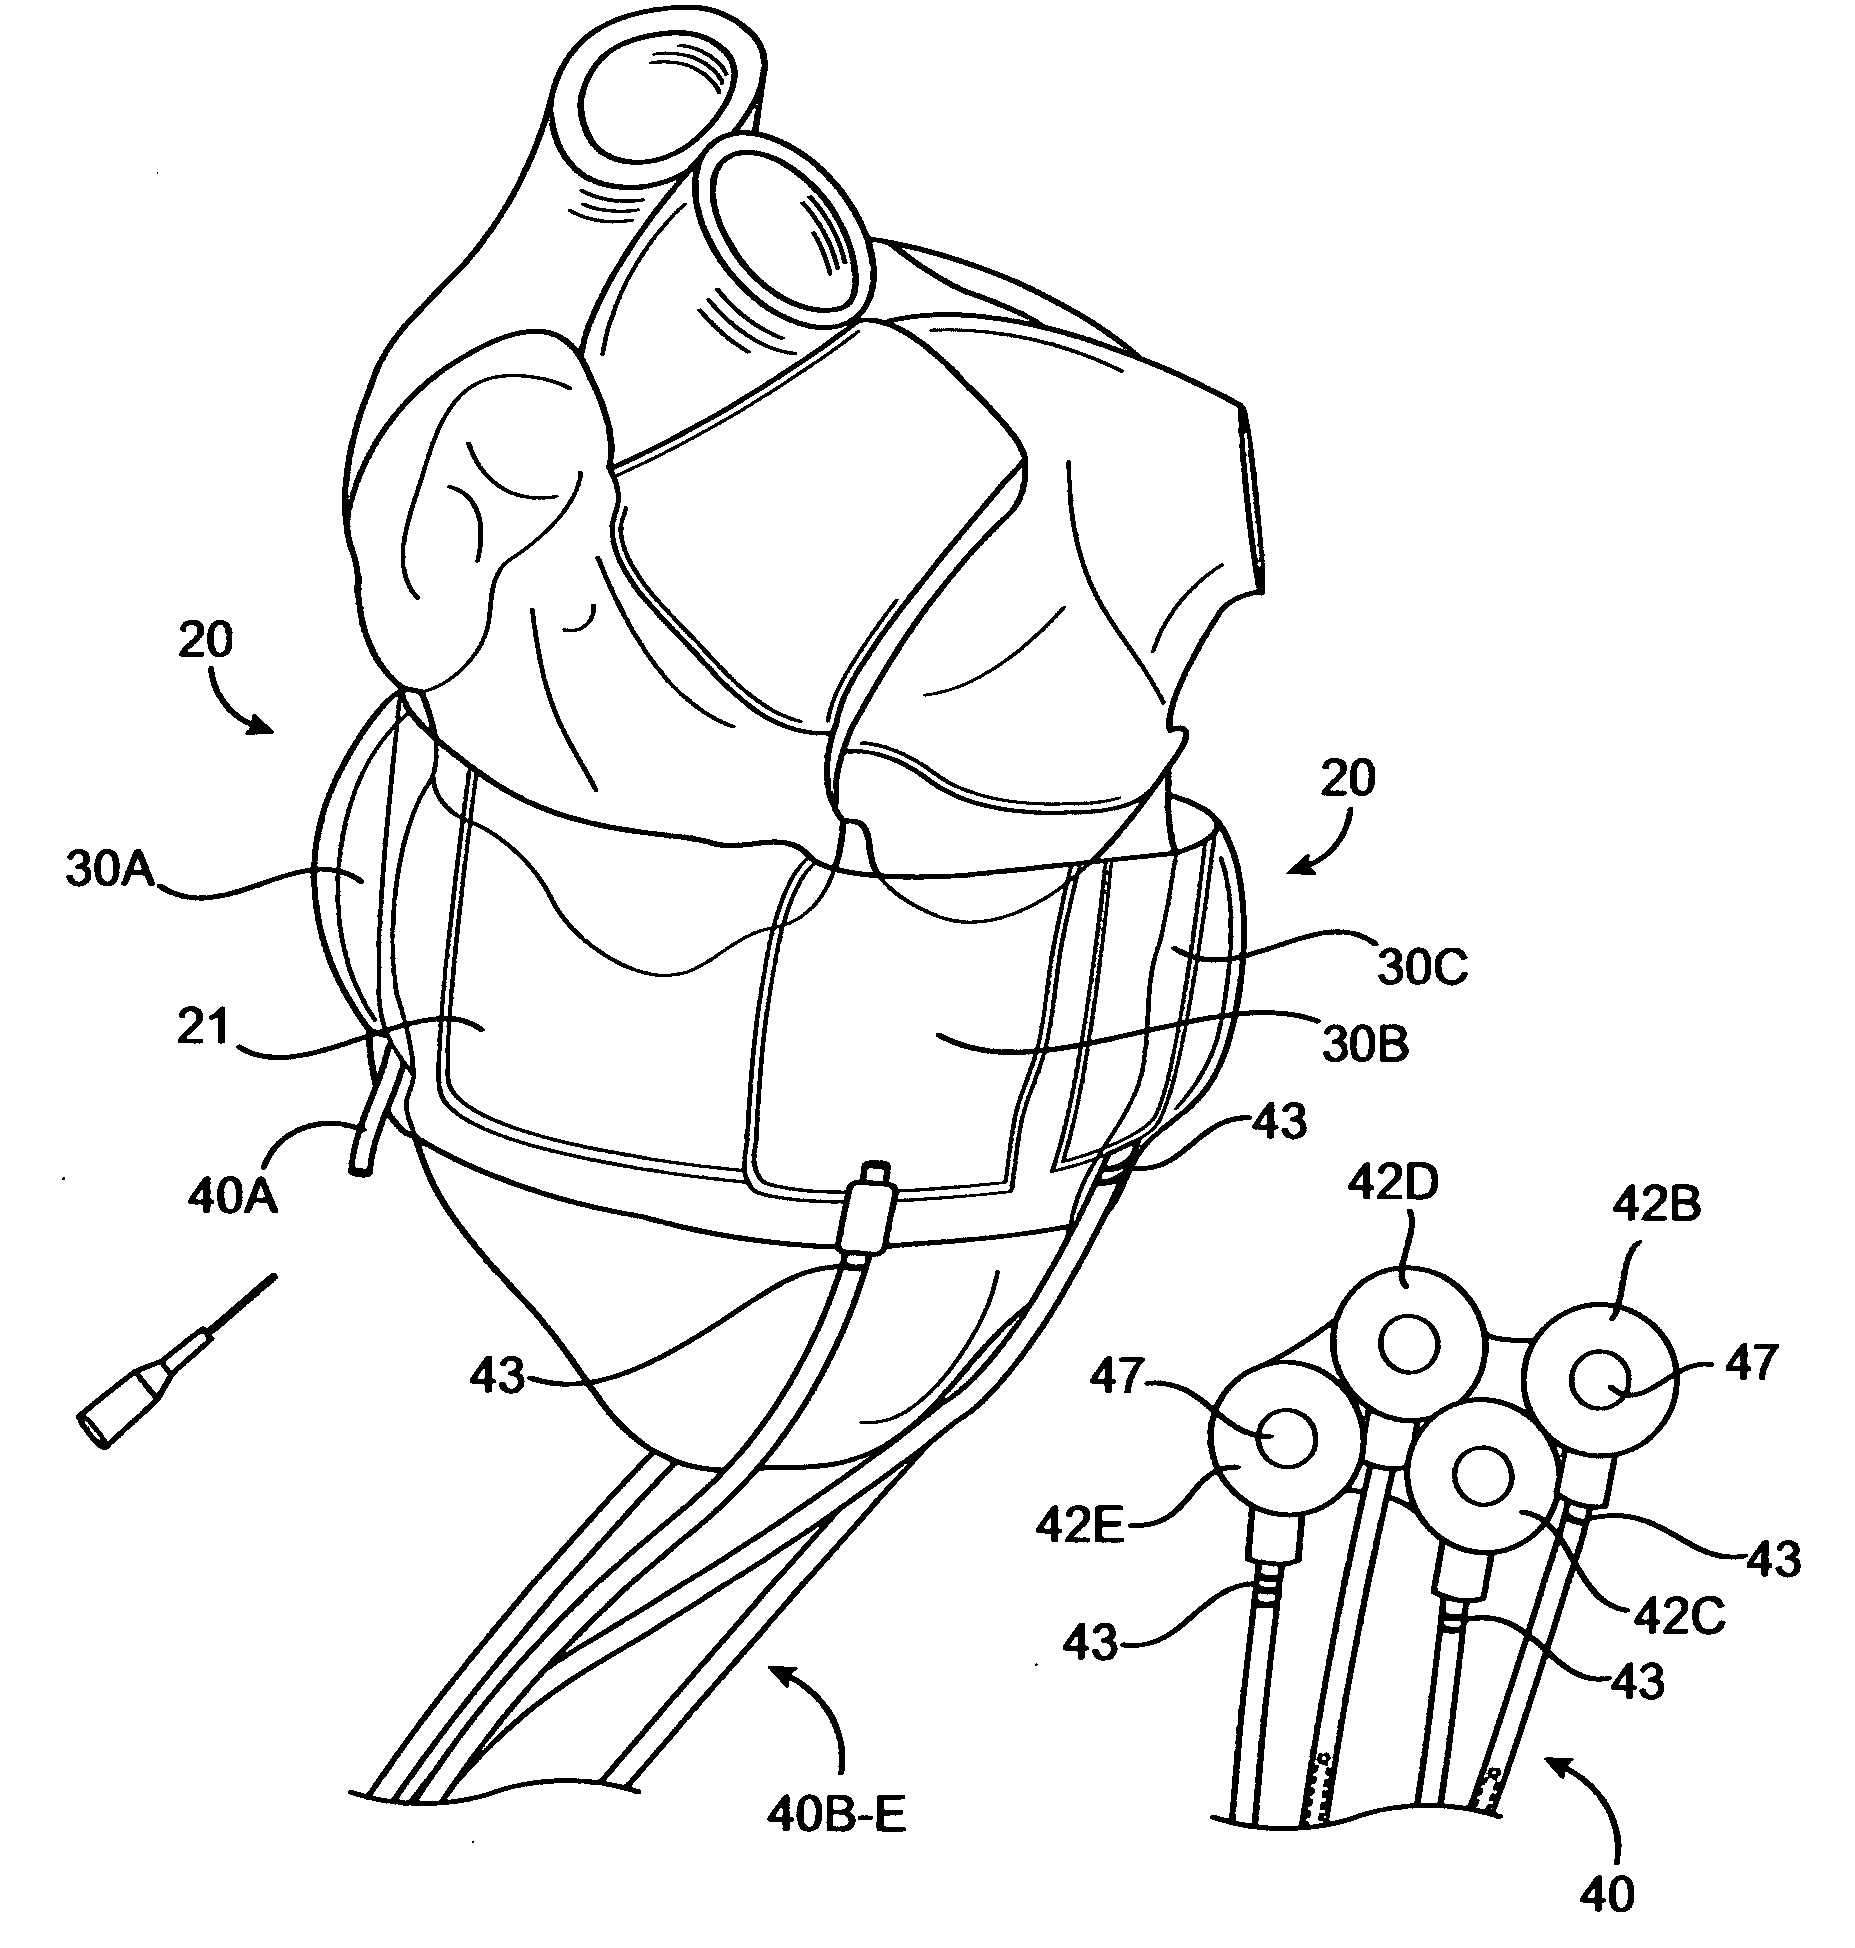 Heart band with fillable chambers to modify heart valve function